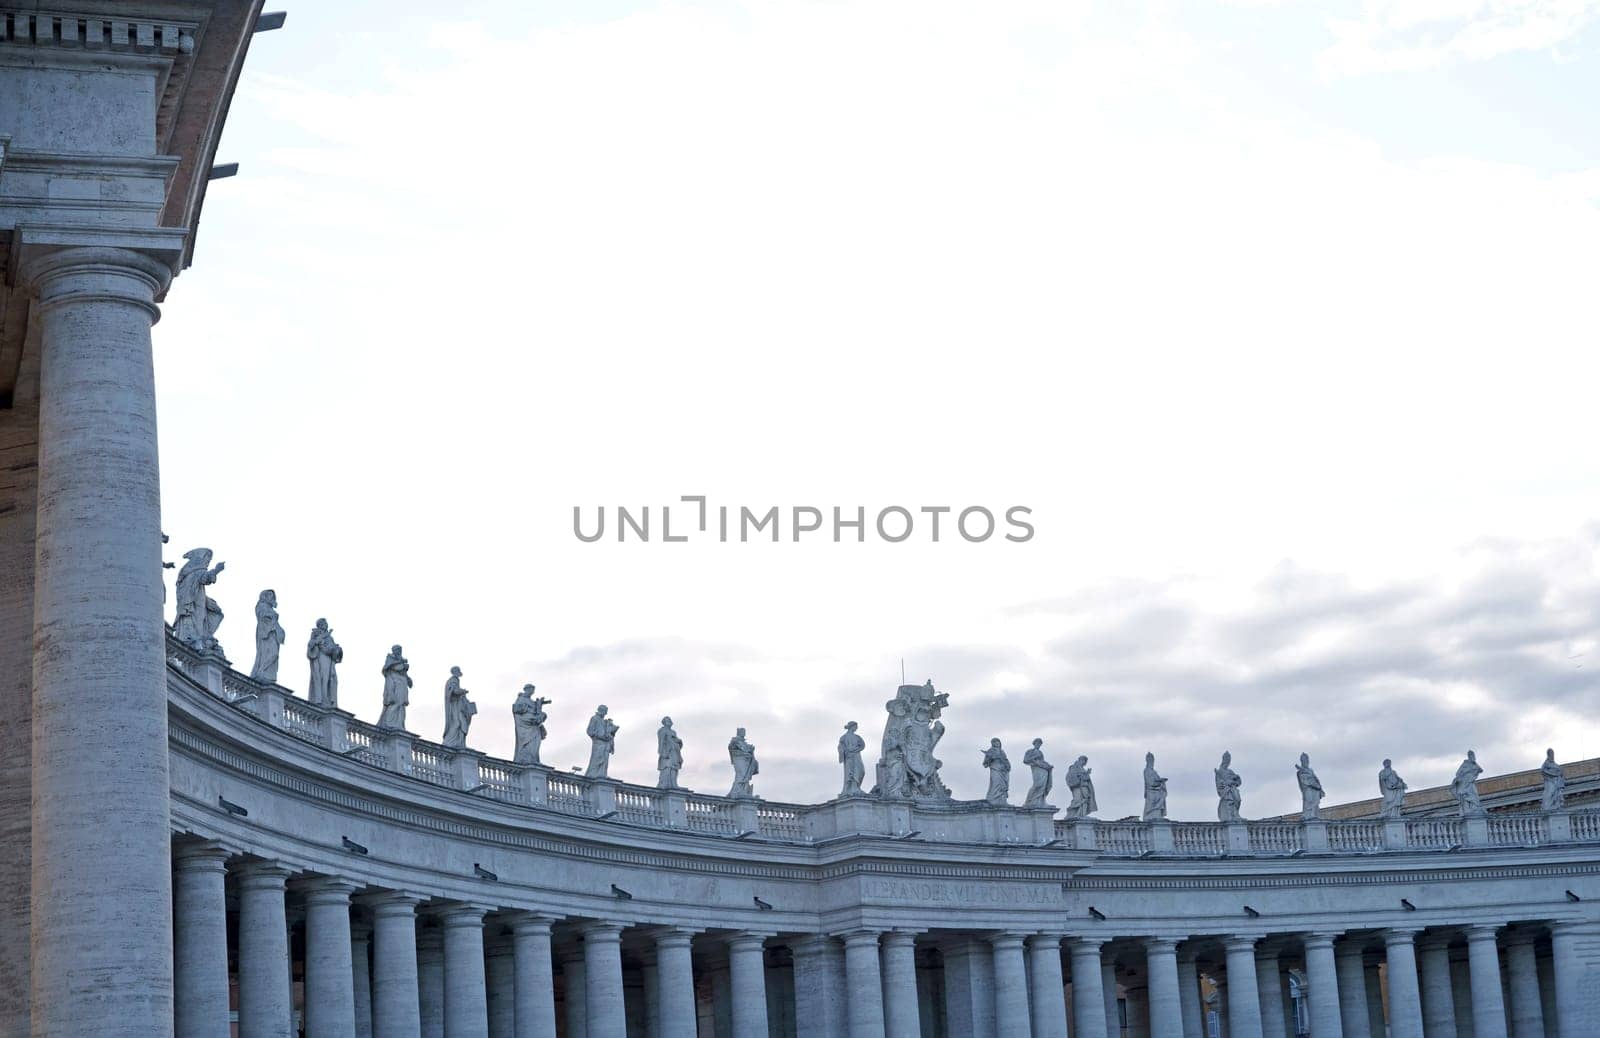 St. Peter's Square, Vatican, Rome, Italy View of the colonnade with statues of saints surrounding St. Peter's Square